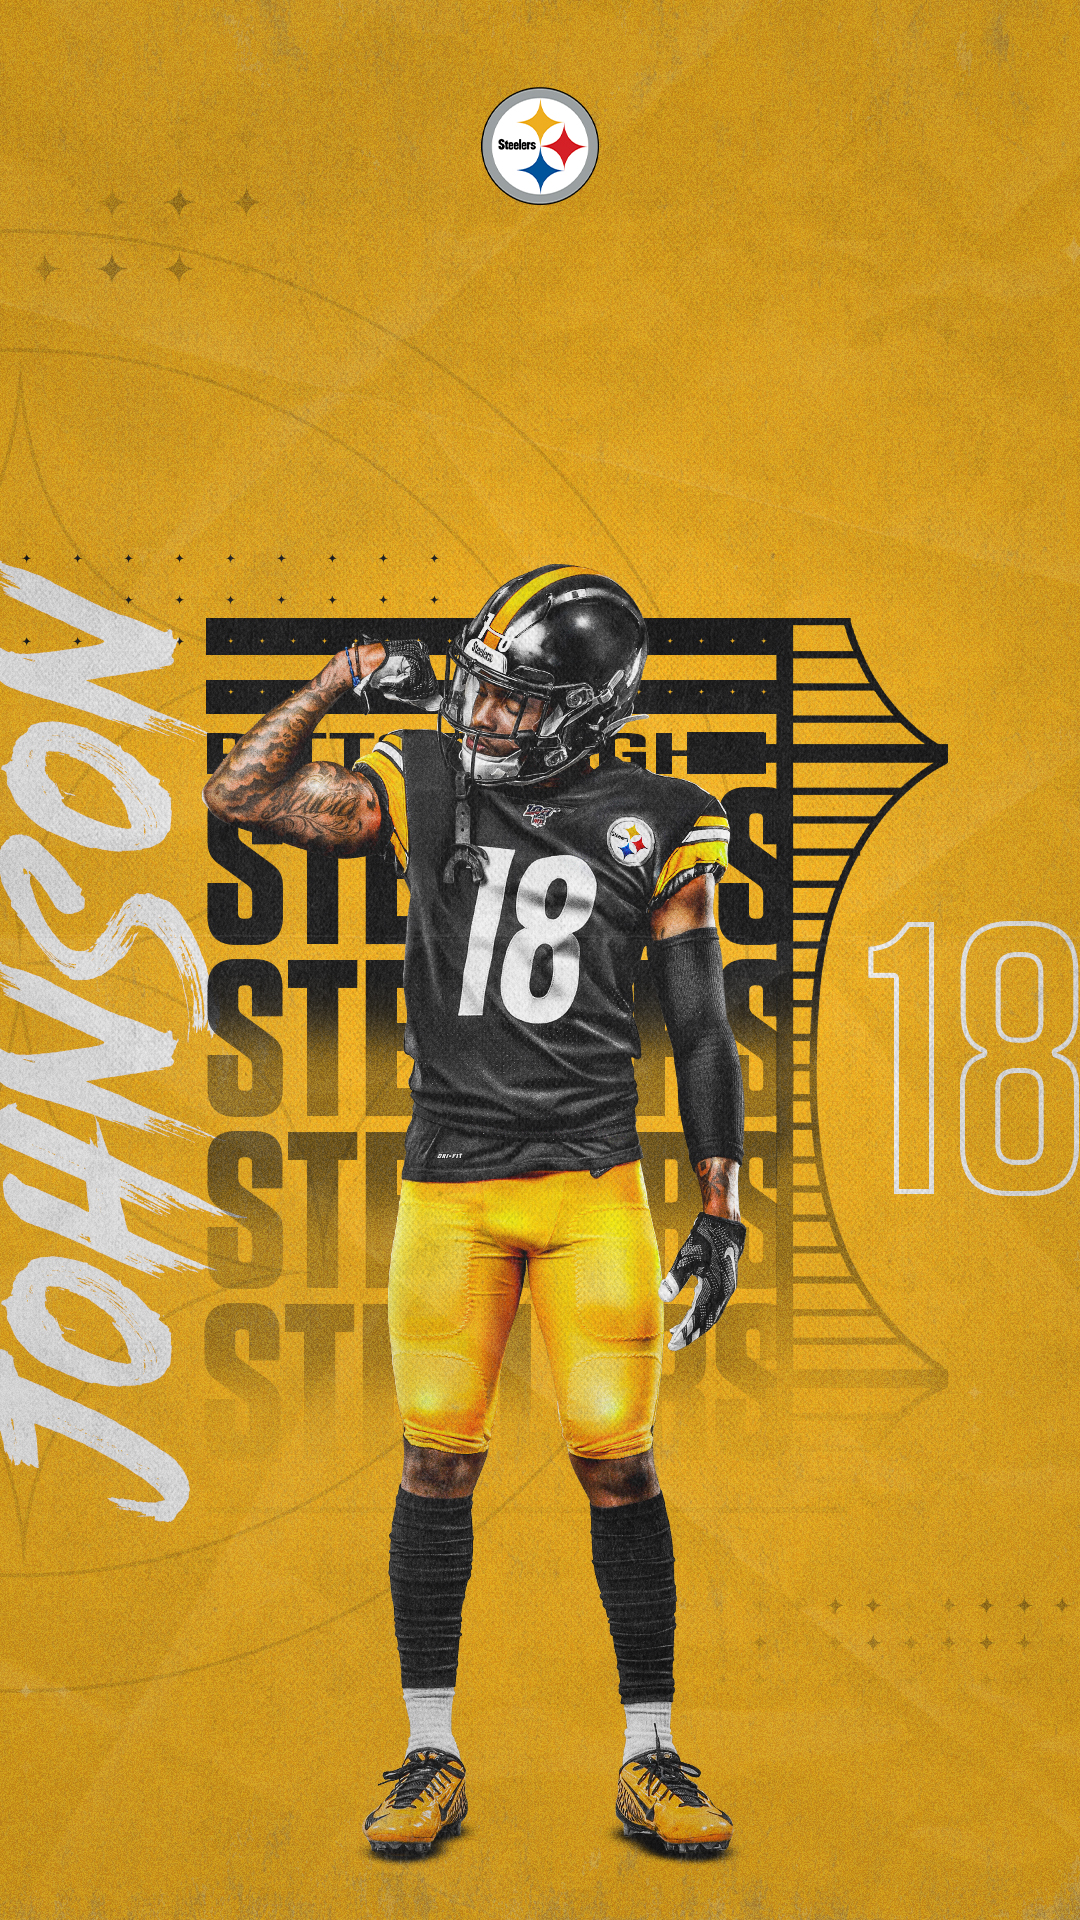 Steelers Phone Wallpapers  Top Free Steelers Phone Backgrounds   WallpaperAccess